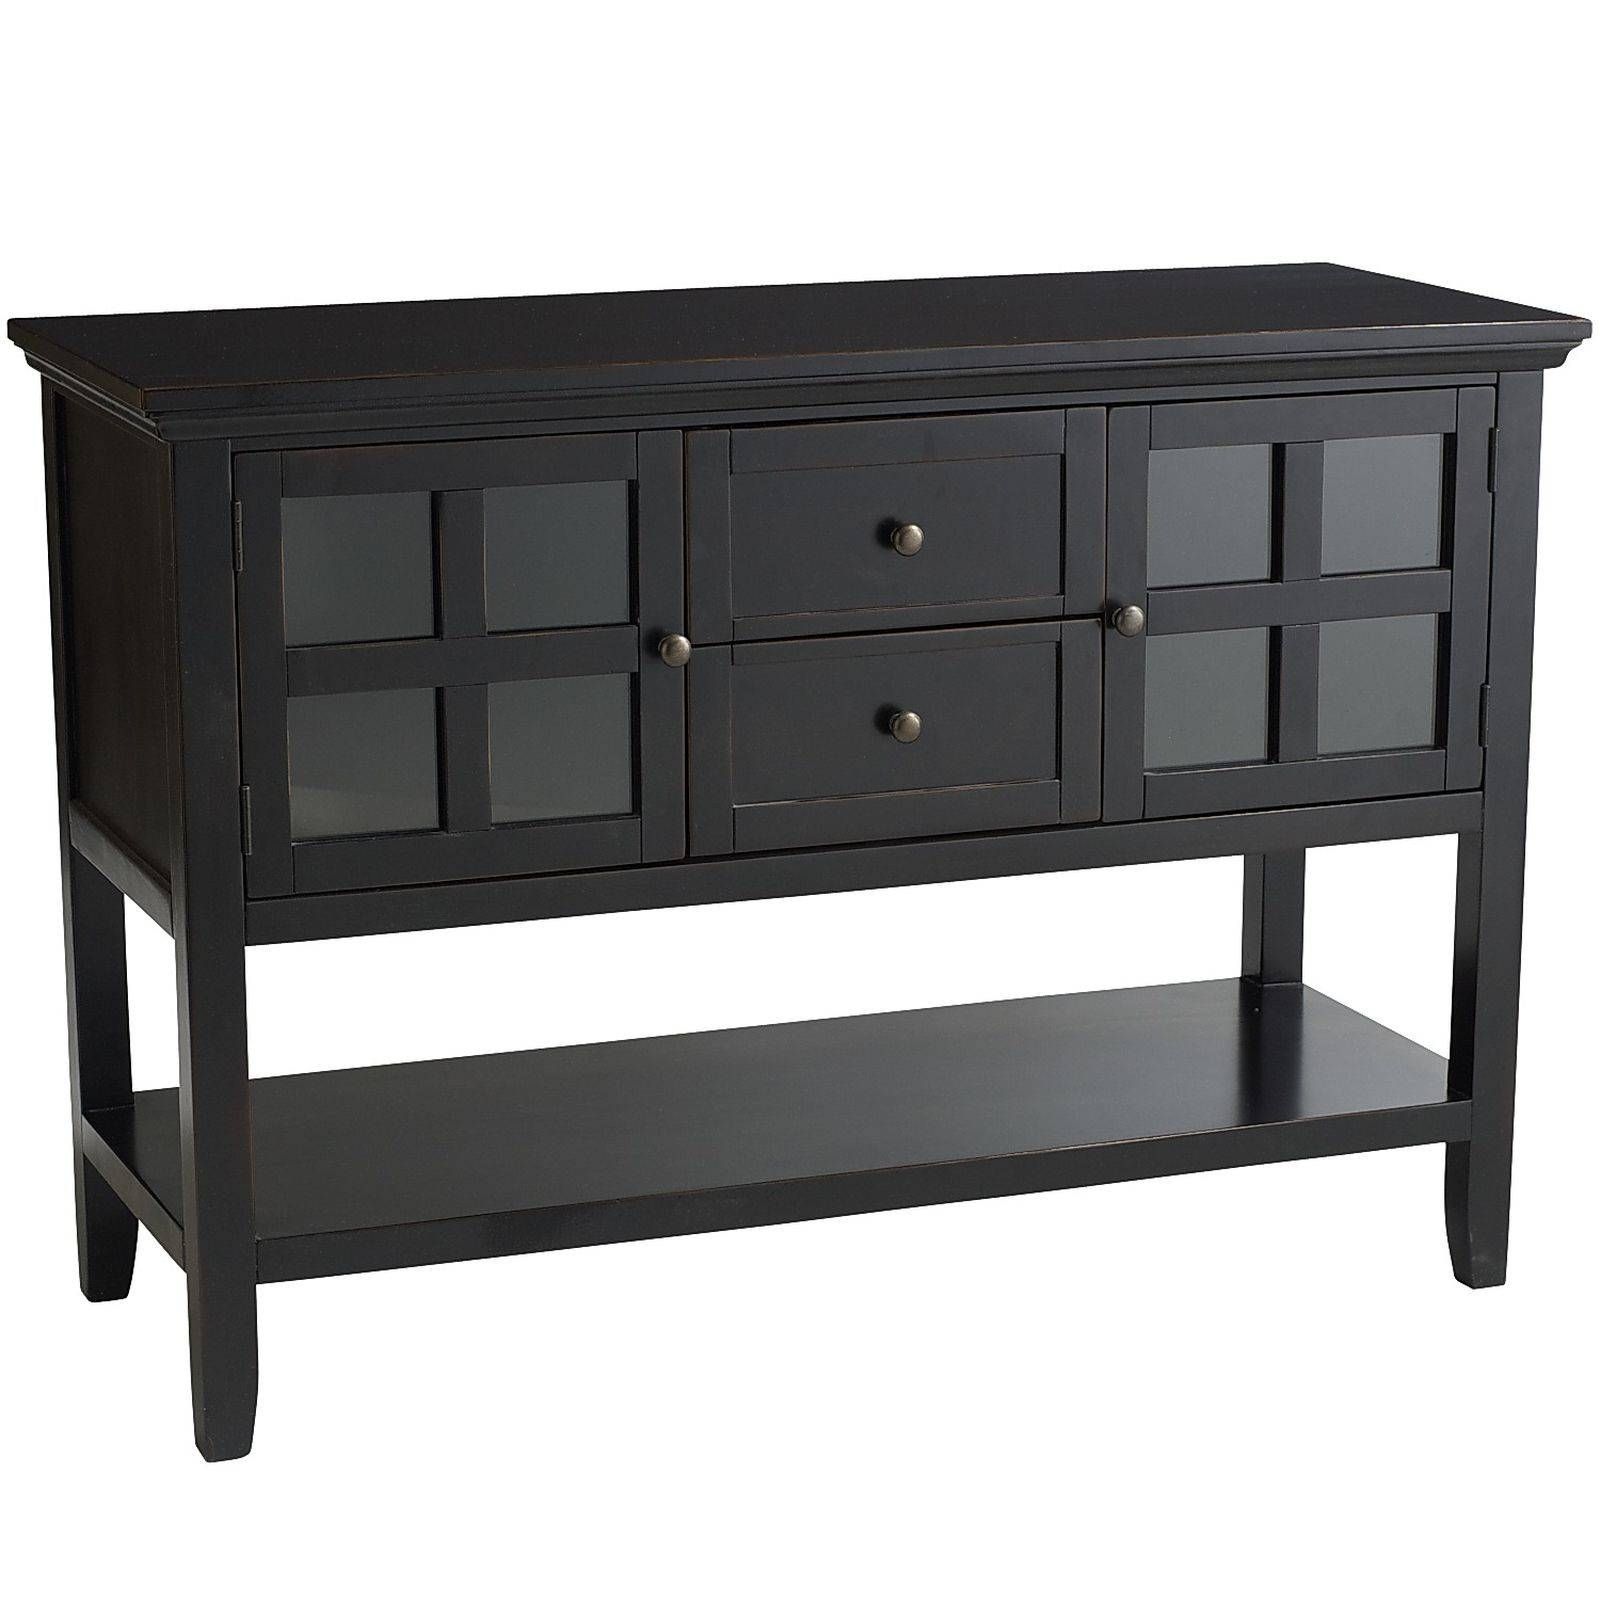 Sideboards. Astounding Buffets And Sideboards: Buffets And Throughout Current Black Buffet Sideboards (Photo 7 of 15)